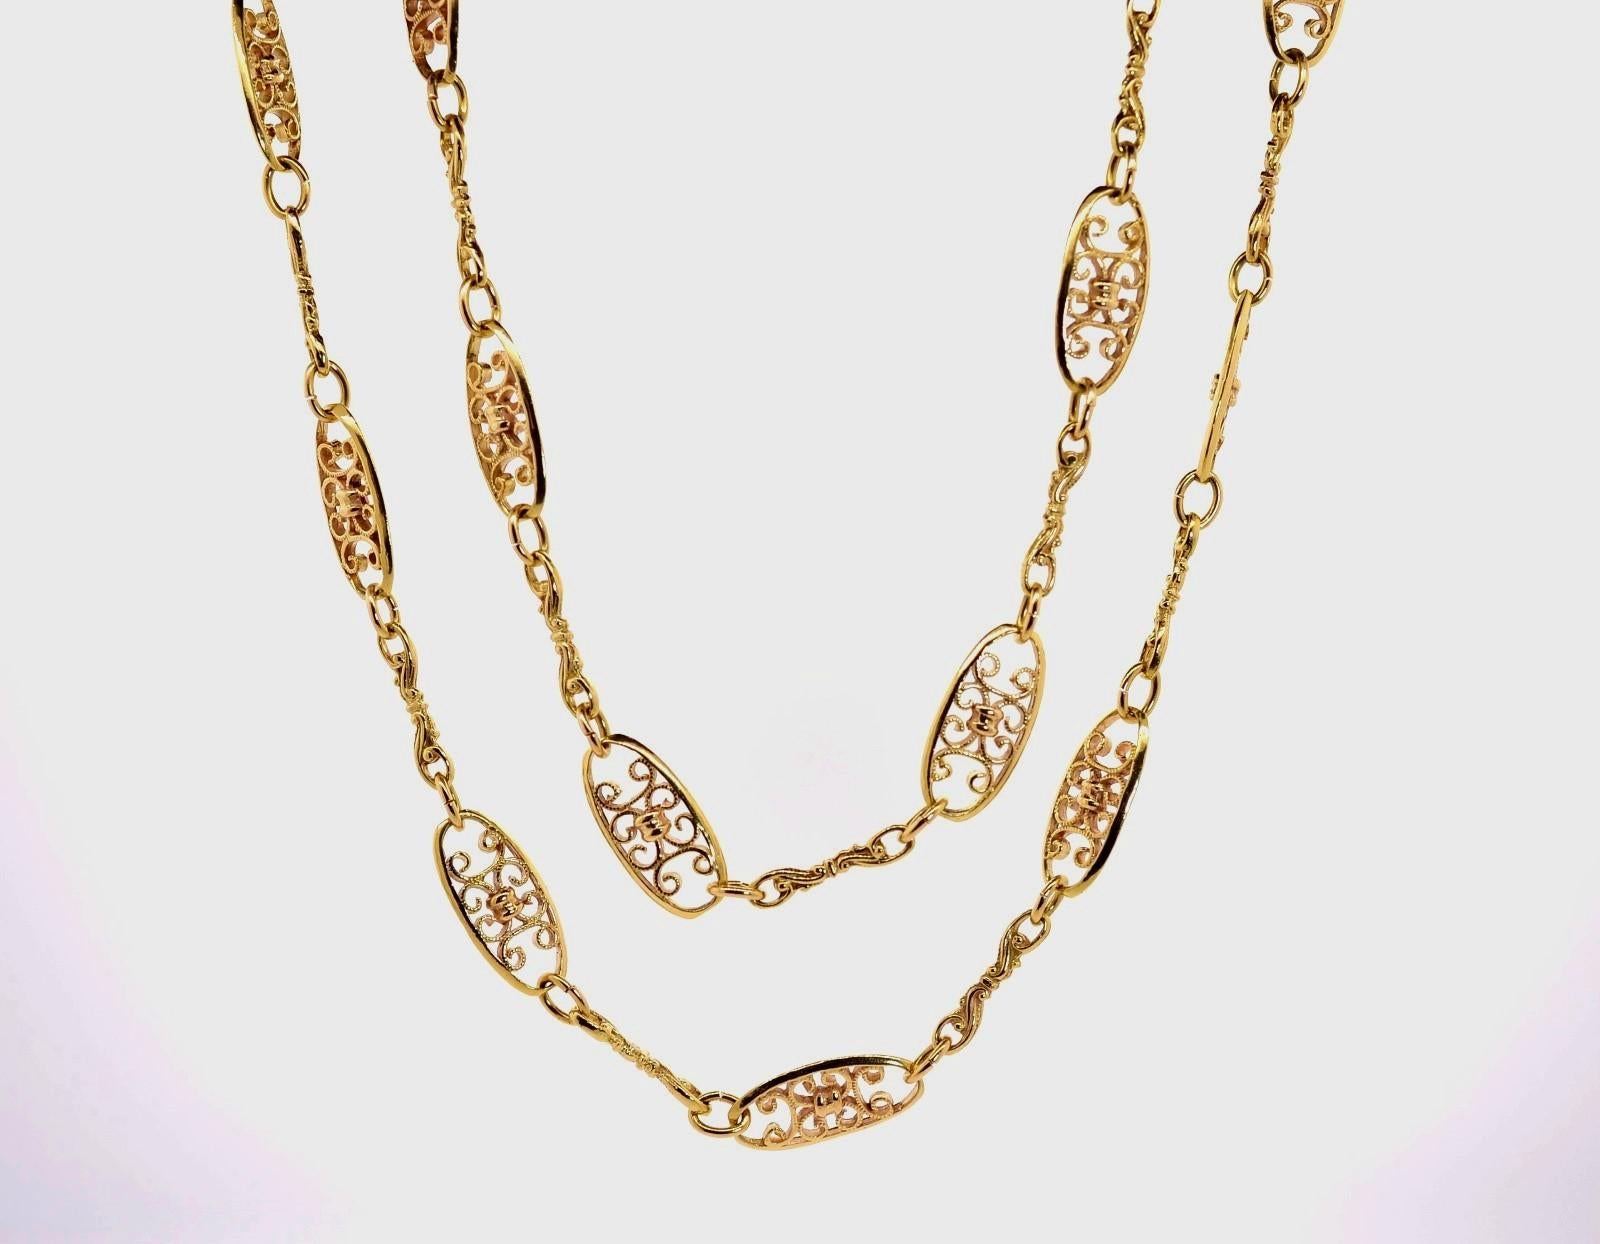 Hand crafted in the 1960s, this lovely chain of open wire links is created in 14KT yellow gold.  The numerous large oval links are embellished with inner swirl designs and are joined with baroque-like bar links giving the chain a 36 inch long